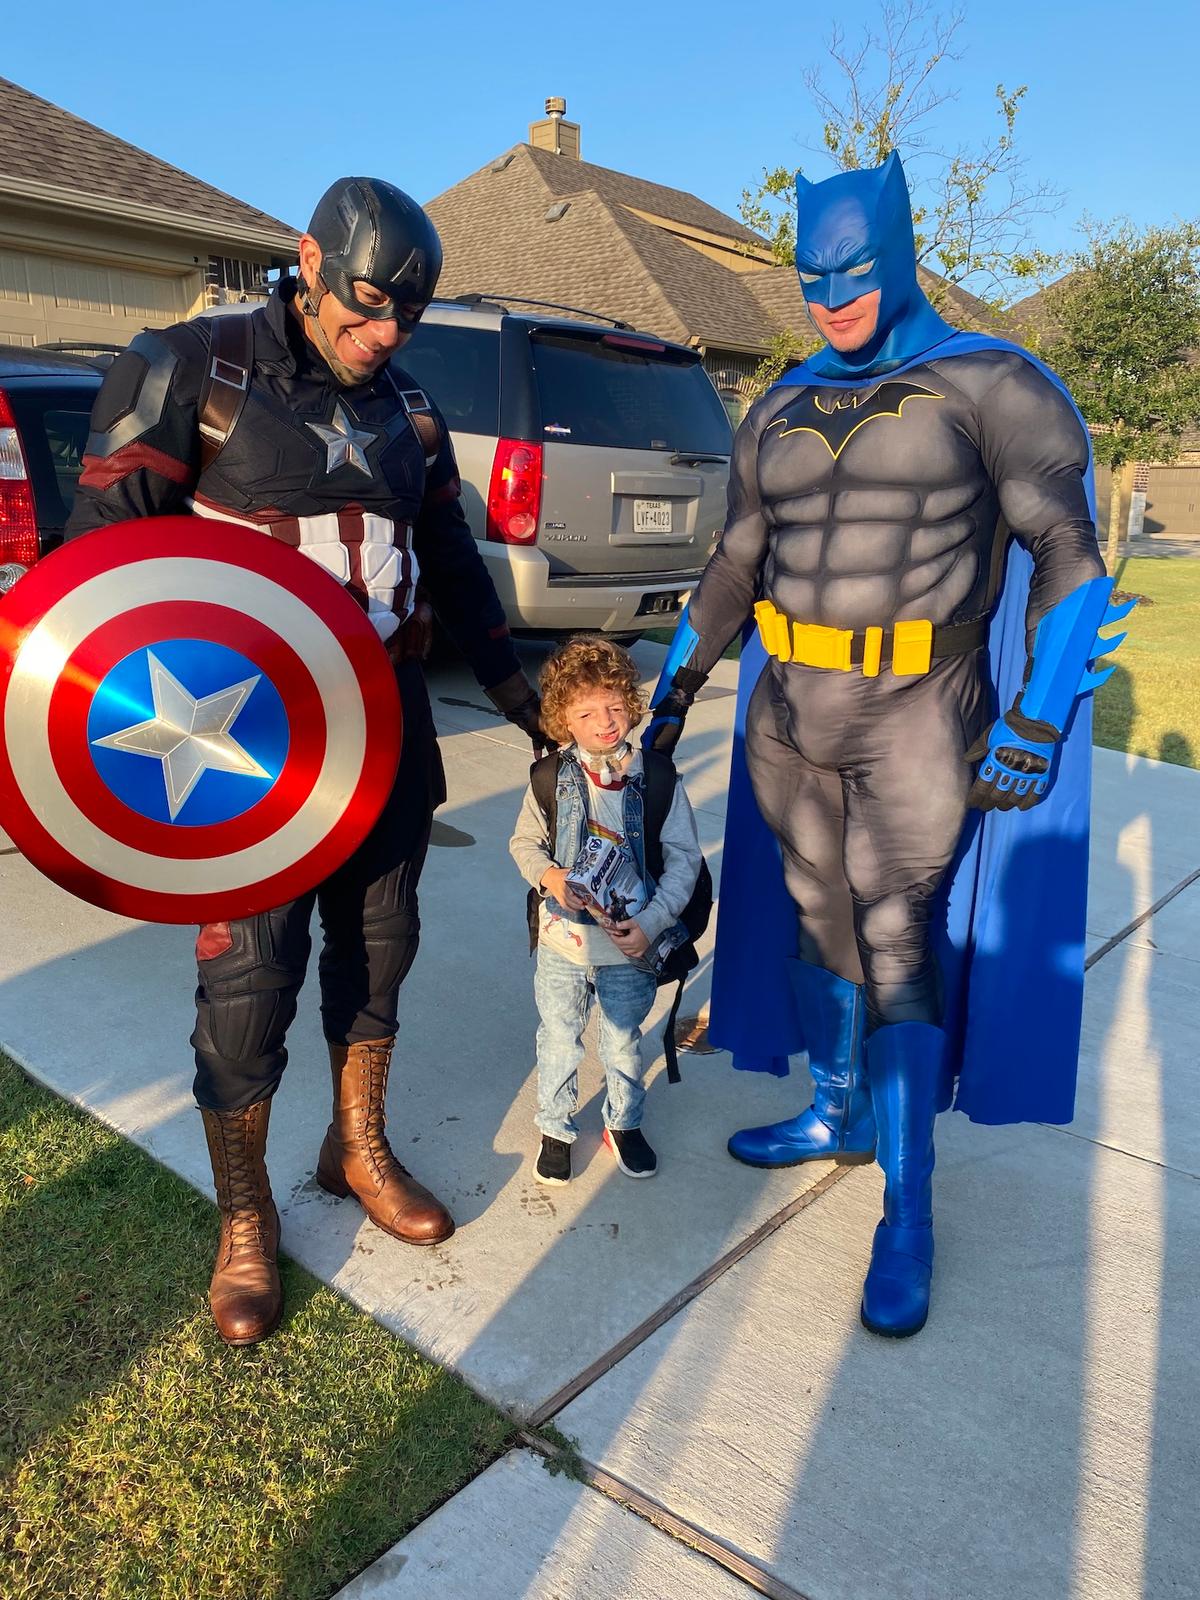 Michael being escorted to the school by the Midlothian fire department with Captain America and Batman. (Courtesy of <a href="https://www.facebook.com/brittanydenisonrealtor">Brittany Denison</a>)